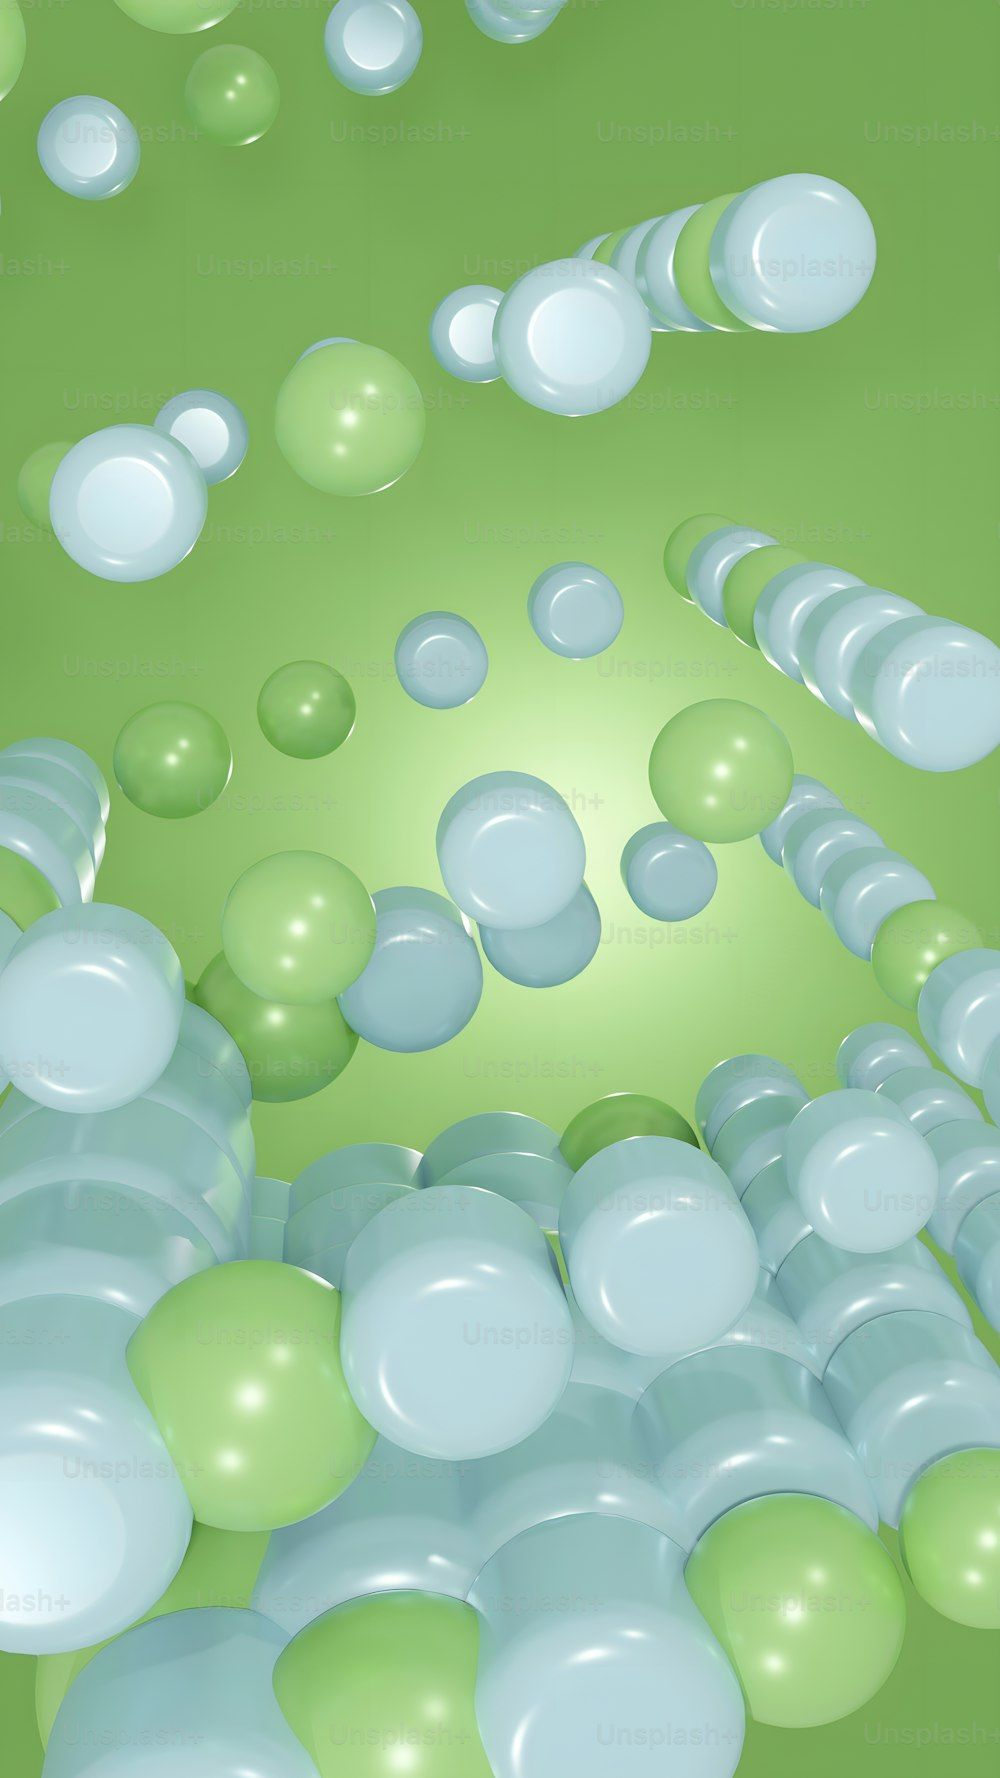 3D render of green and blue spheres on a green background - Mint green